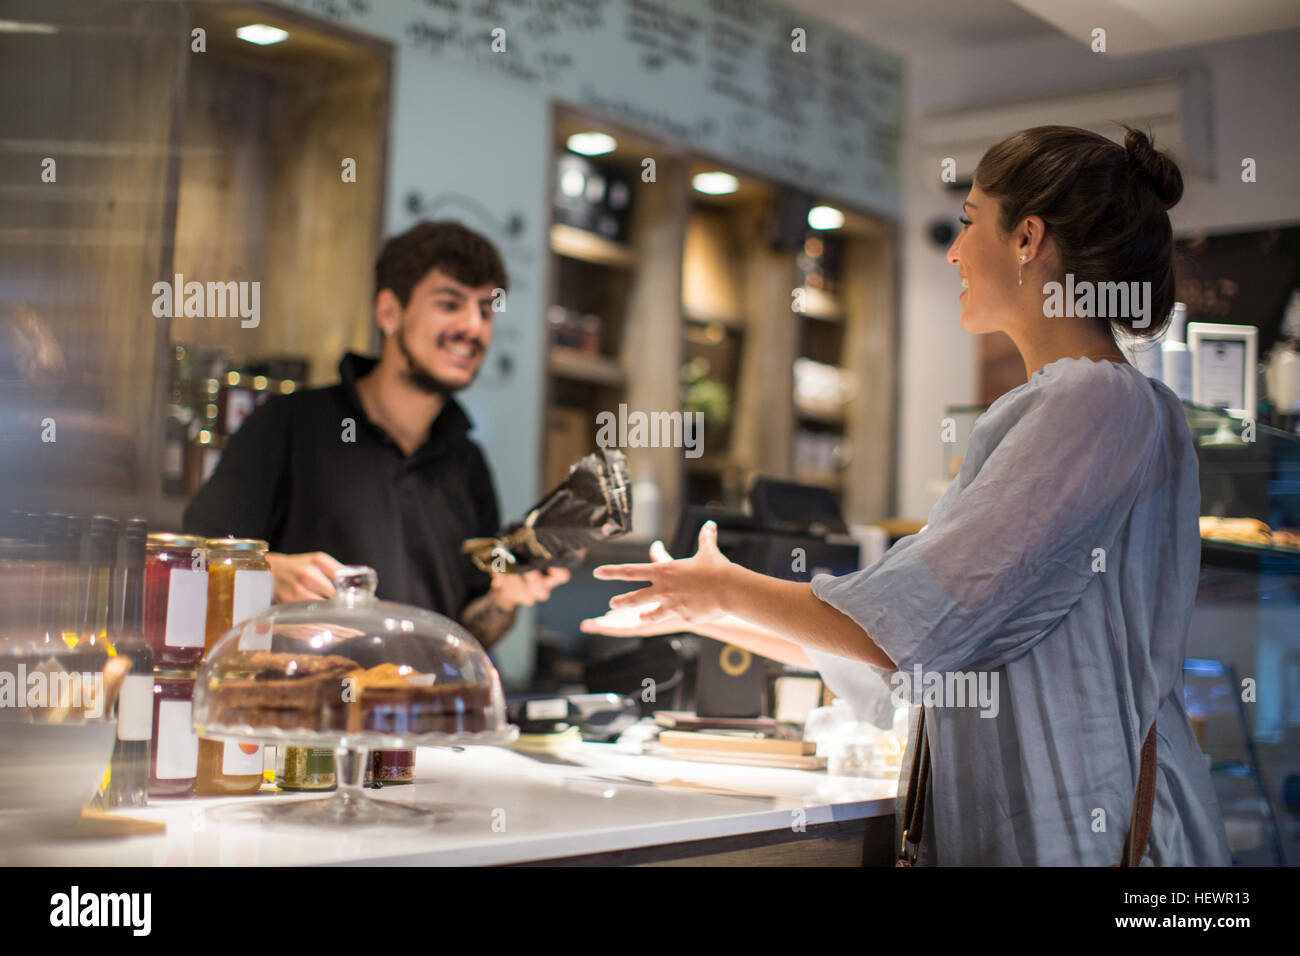 Barista handing baguette to female customer at cafe counter Stock Photo